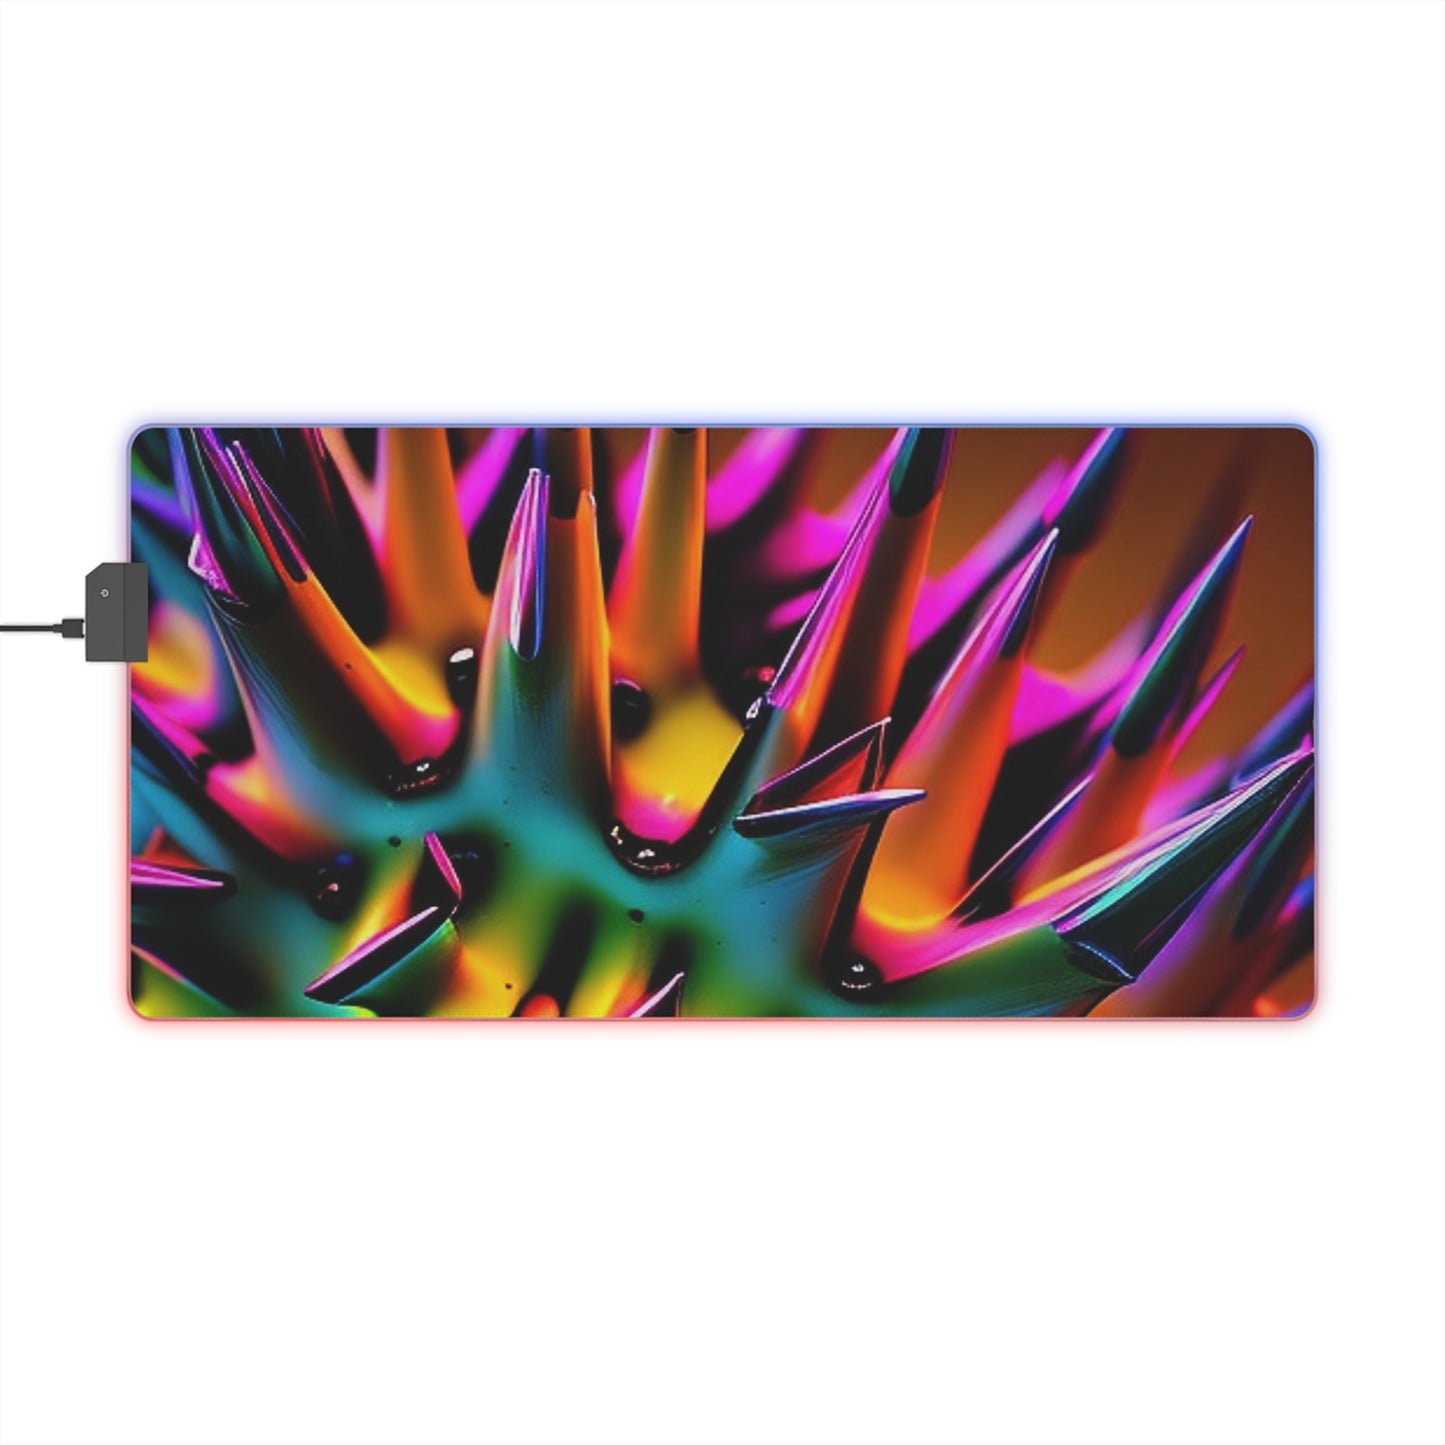 LED Gaming Mouse Pad Macro Neon Spike 3